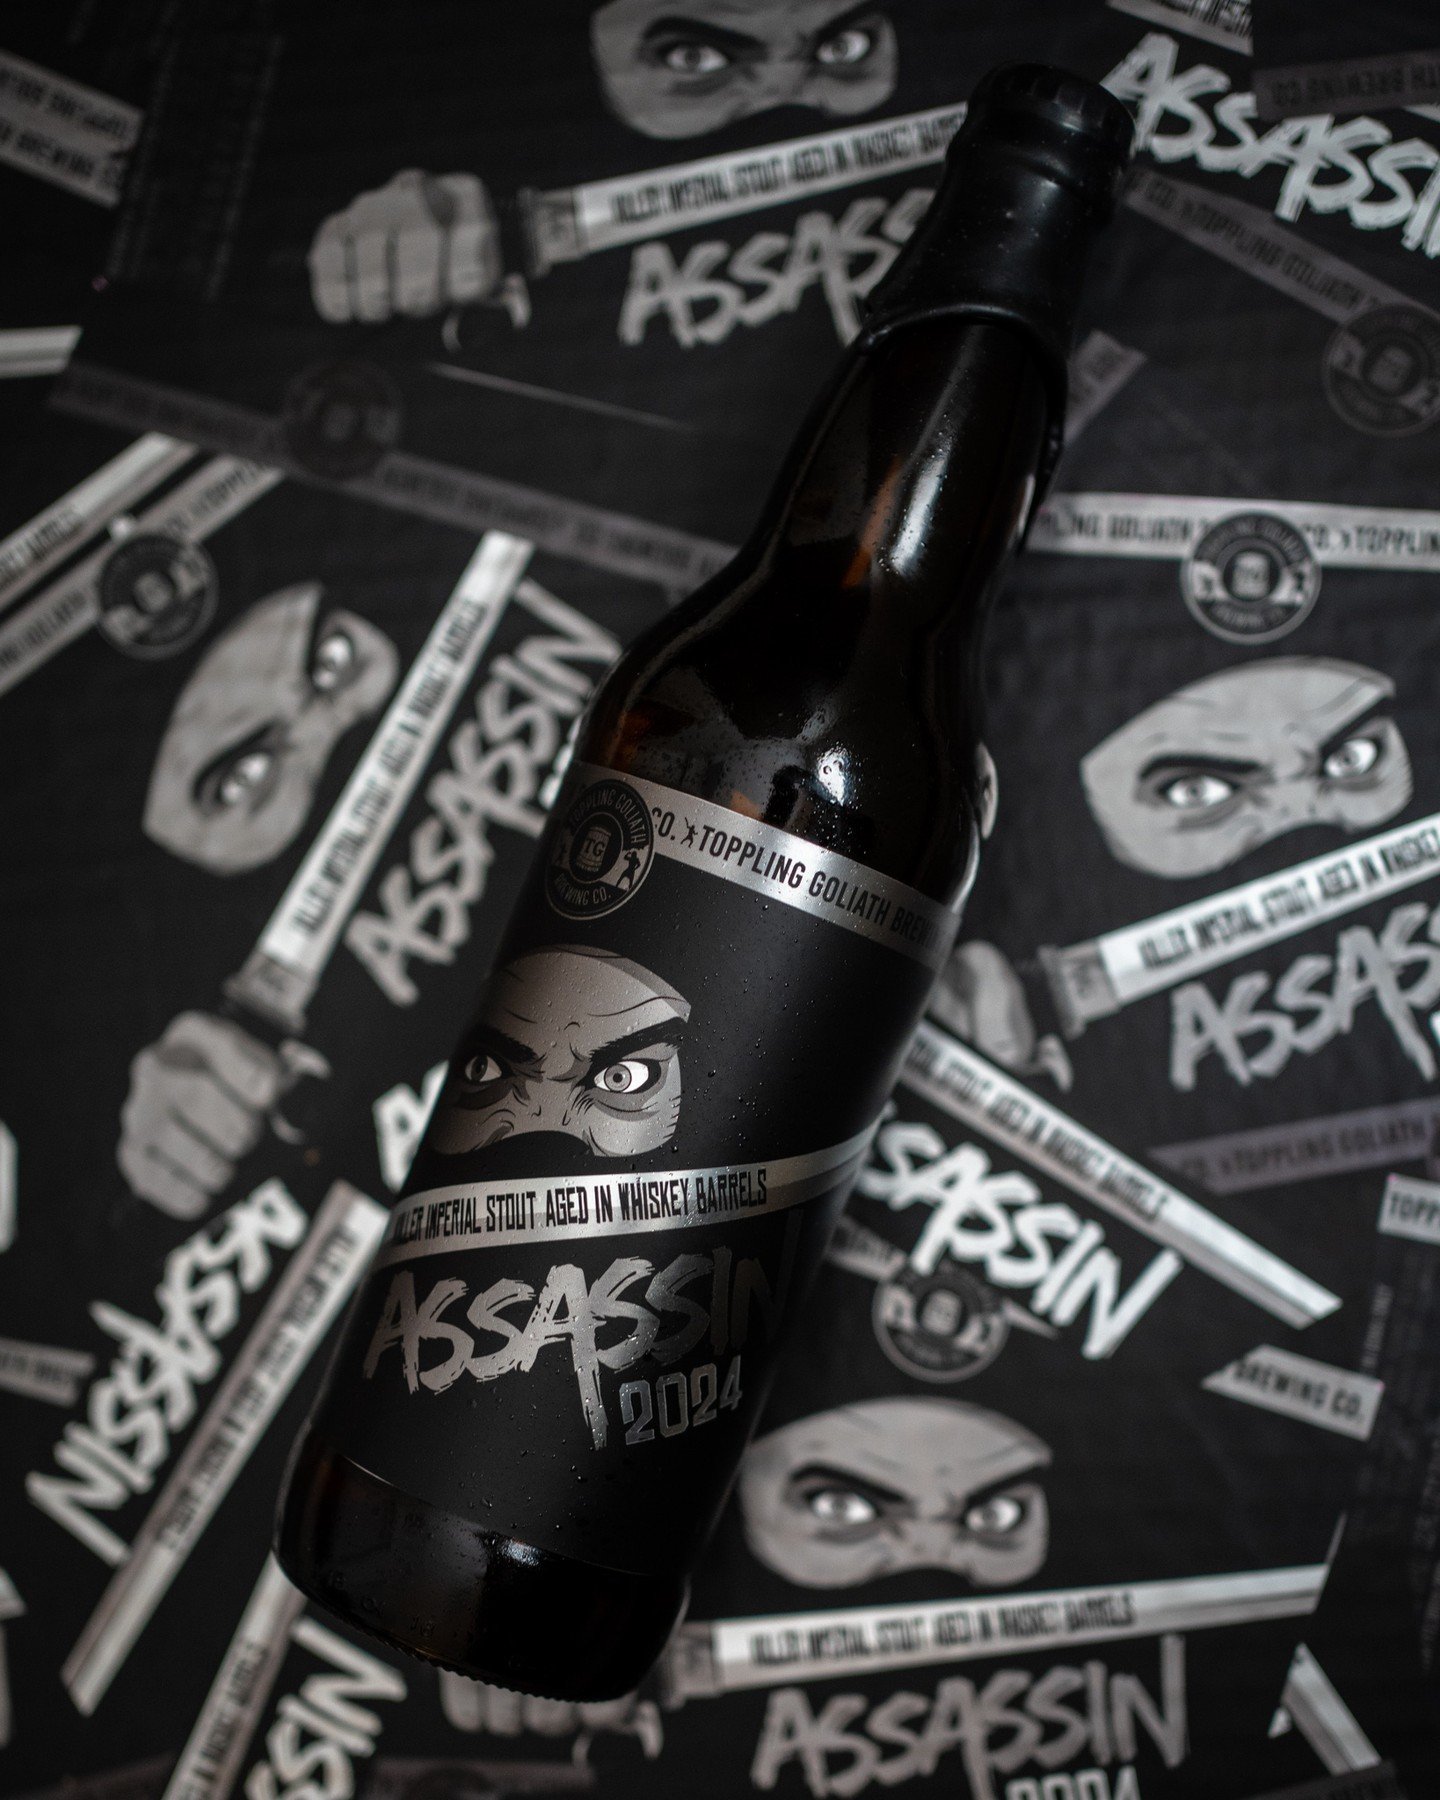 Who's ready for Assassin 2024?⚔️ 

Mark your calendars for the Assassin 2024 lottery which will open on May 7th at 9am CST &amp; close on May 12th at 11:59pm CST.

The release will take place on Saturday, June 22 with a day full of good brews, food, 